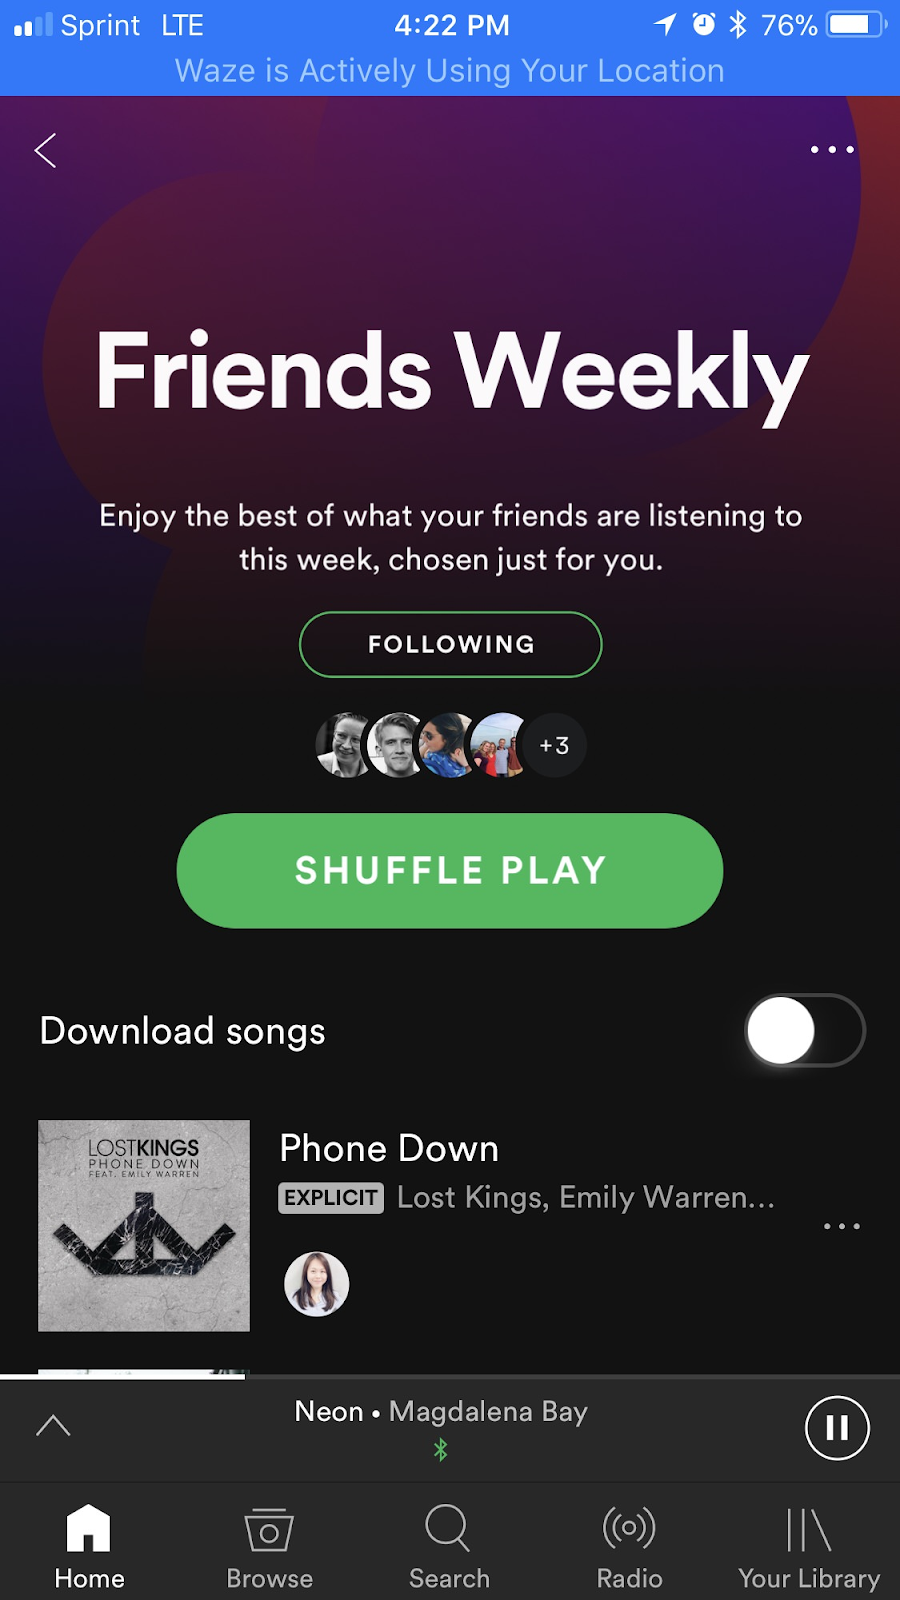 Image source: https://www.reddit.com/r/spotify/comments/7y2kor/spotify_has_introduced_a_friends_weekly_playlist/